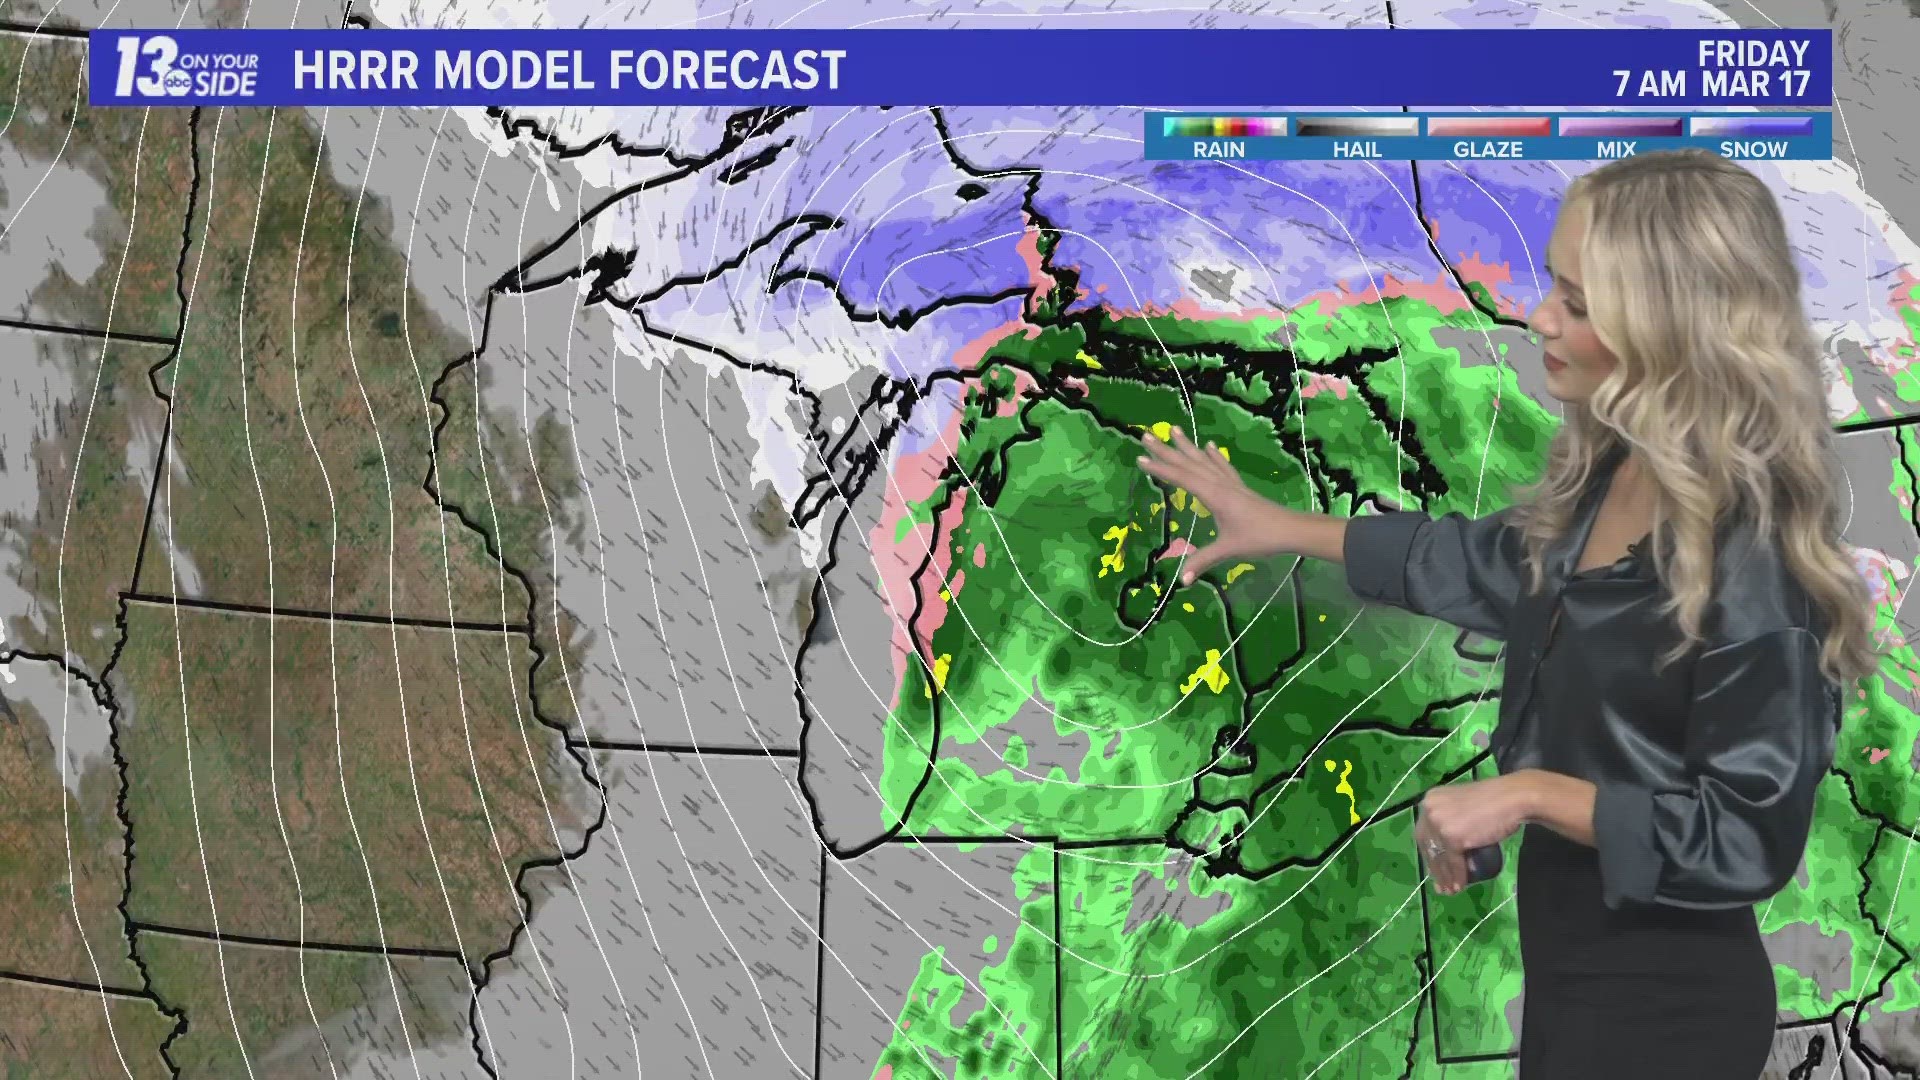 Rain will turn to snowfall on Friday as temperatures fall.